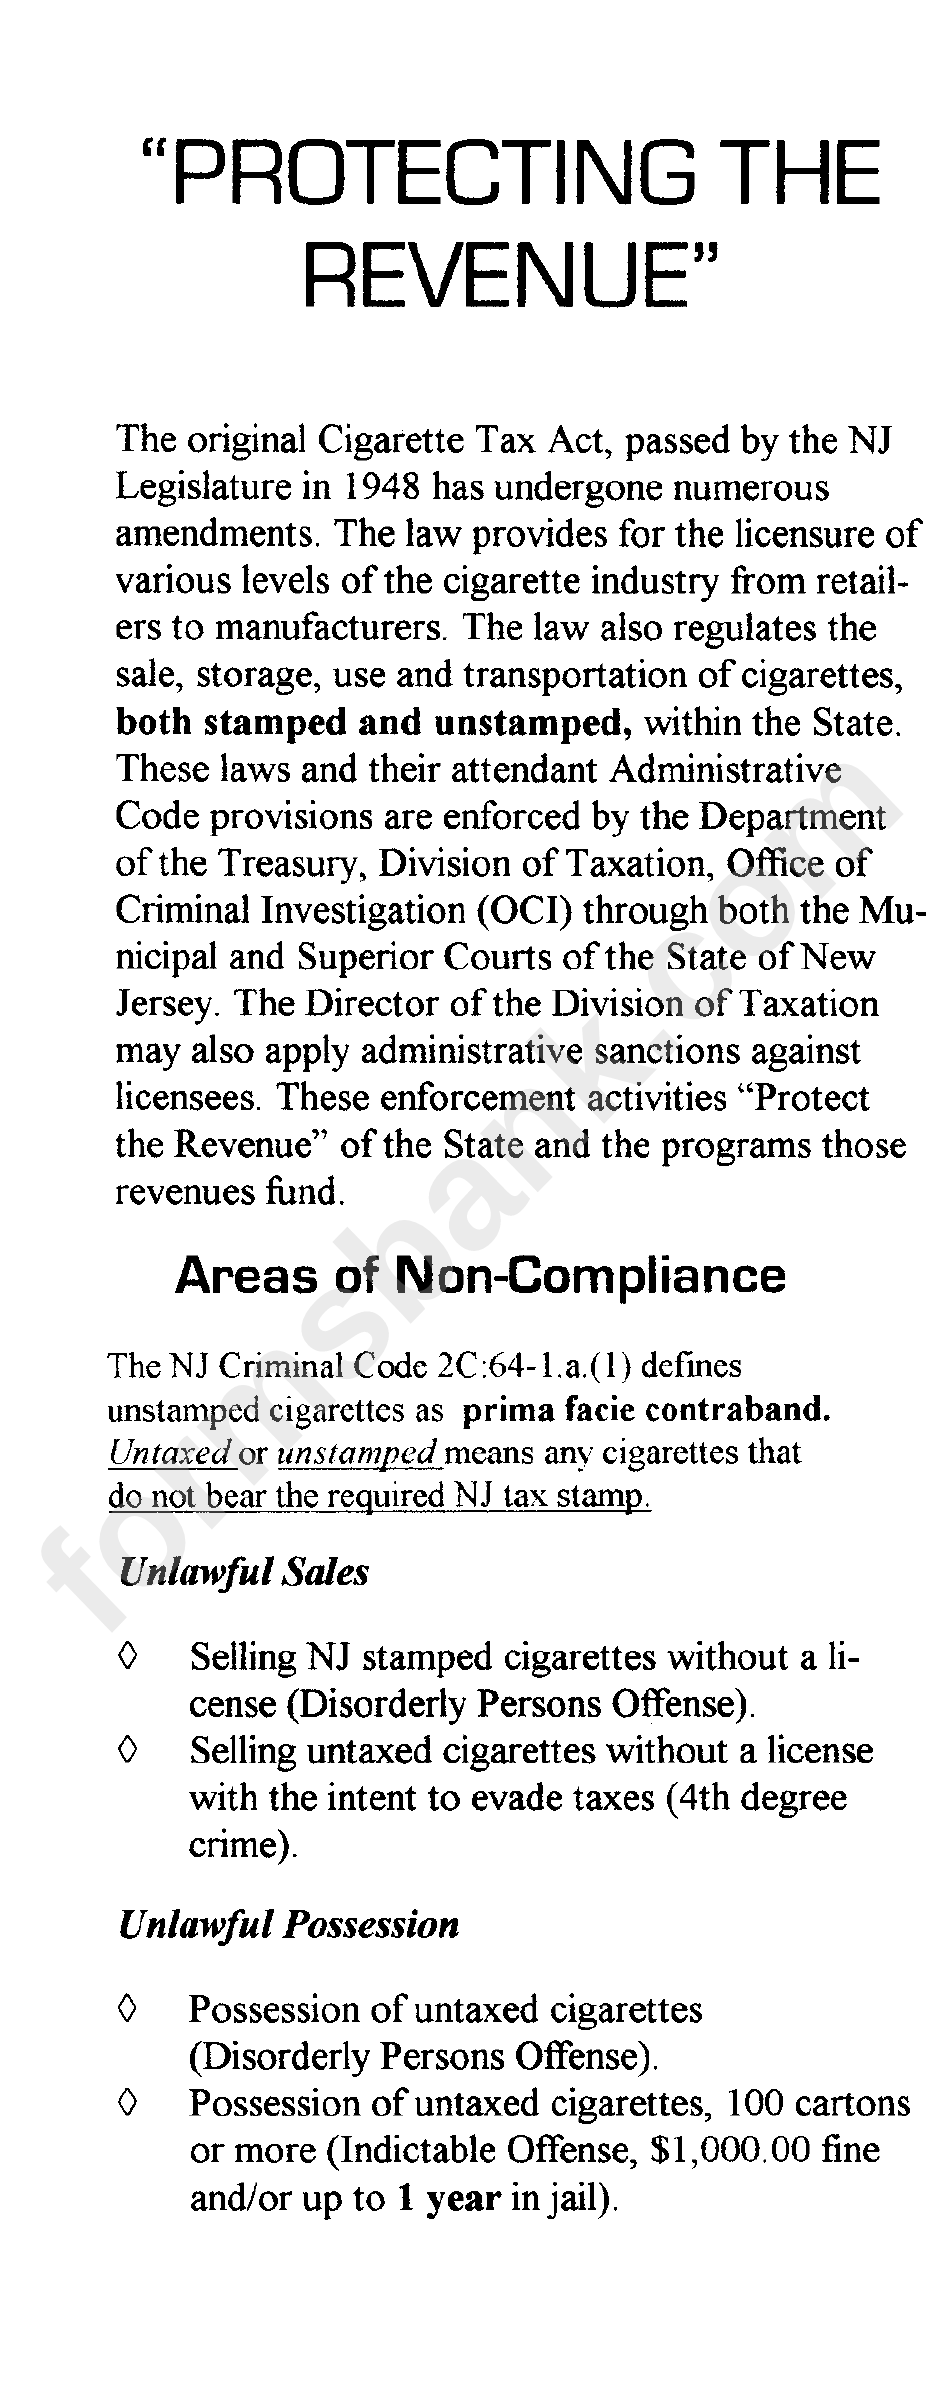 A Guide To The Enforcement Of The New Jersey Cigarette Tax Act